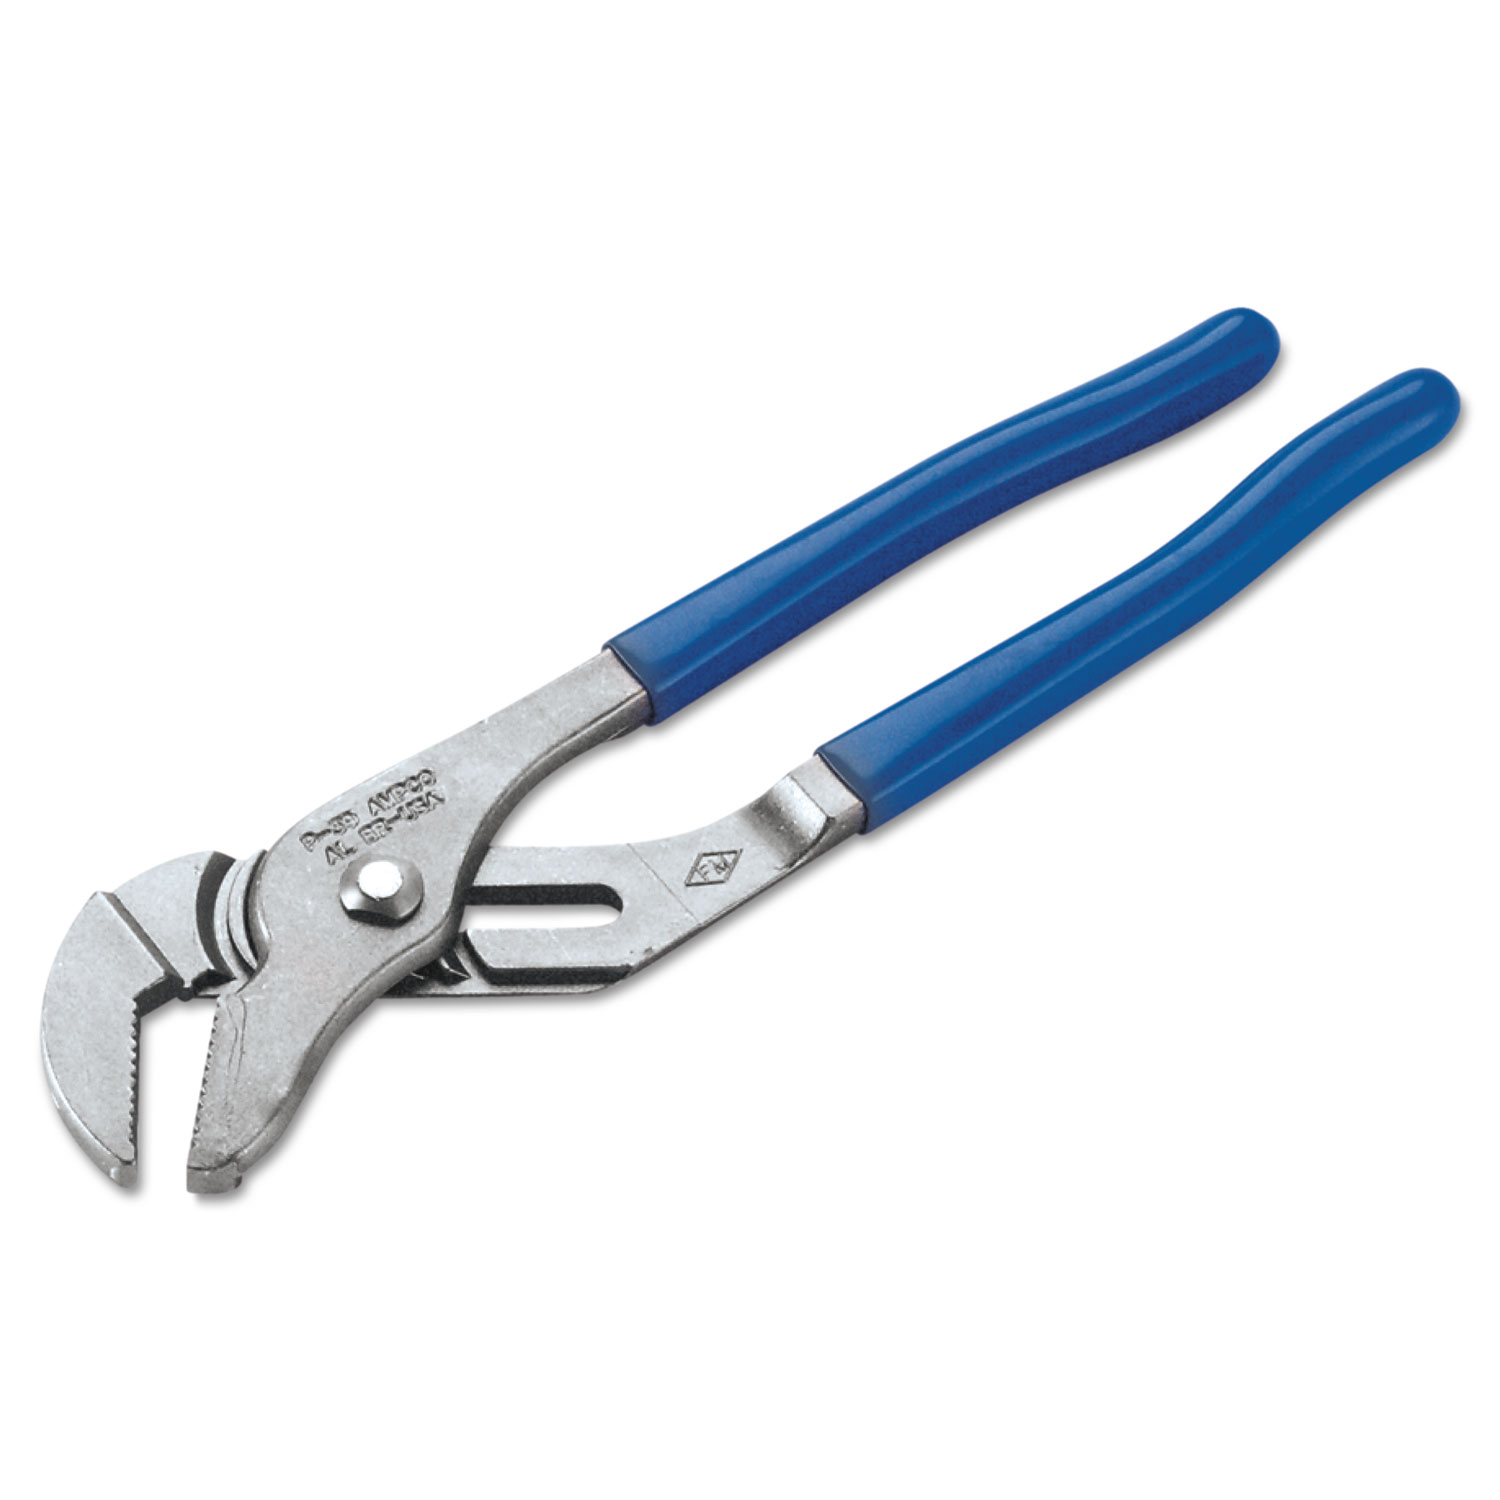 Groove-Joint Pliers, 9 1/2